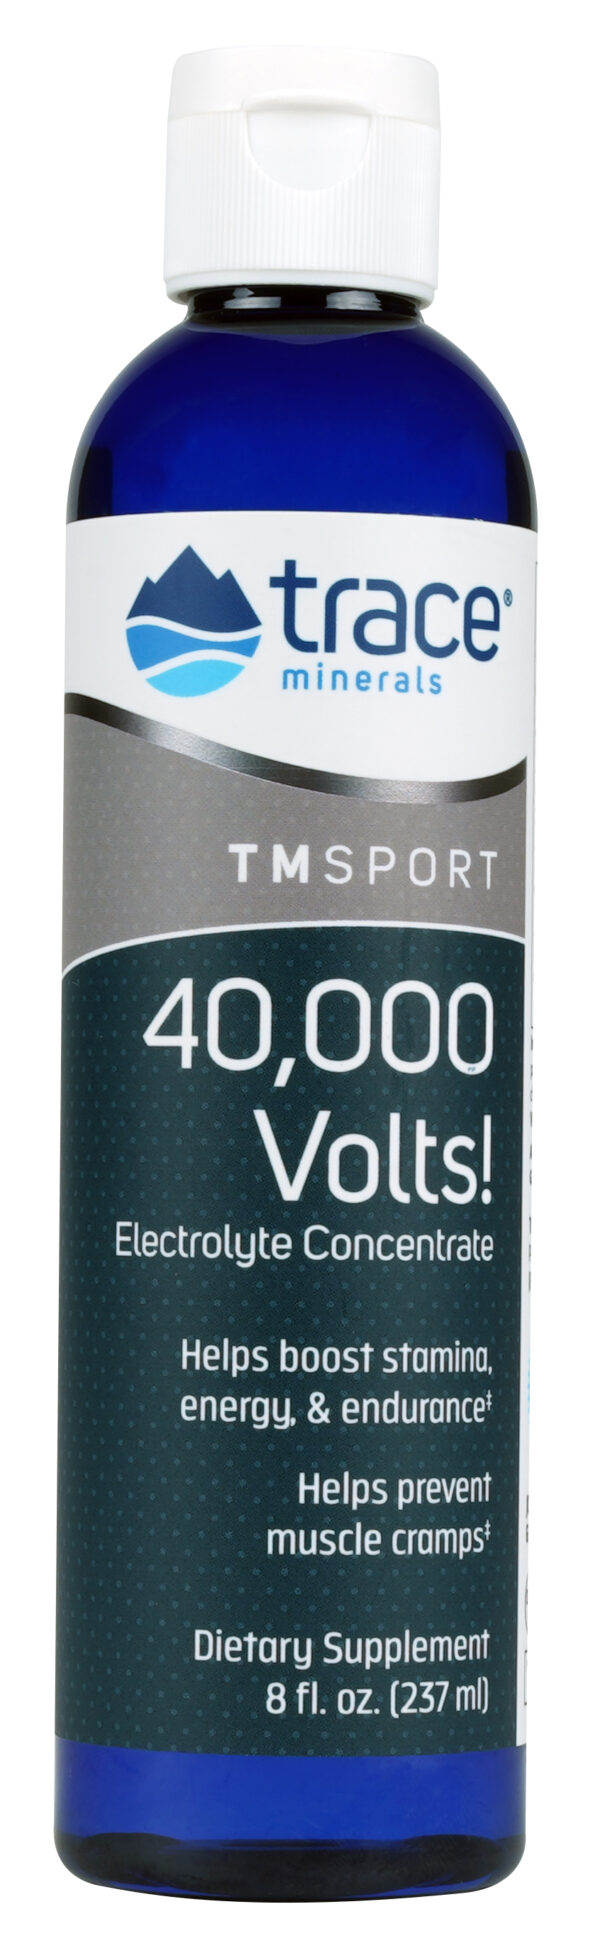 Electrolyte Concentrate: 40000 Volts